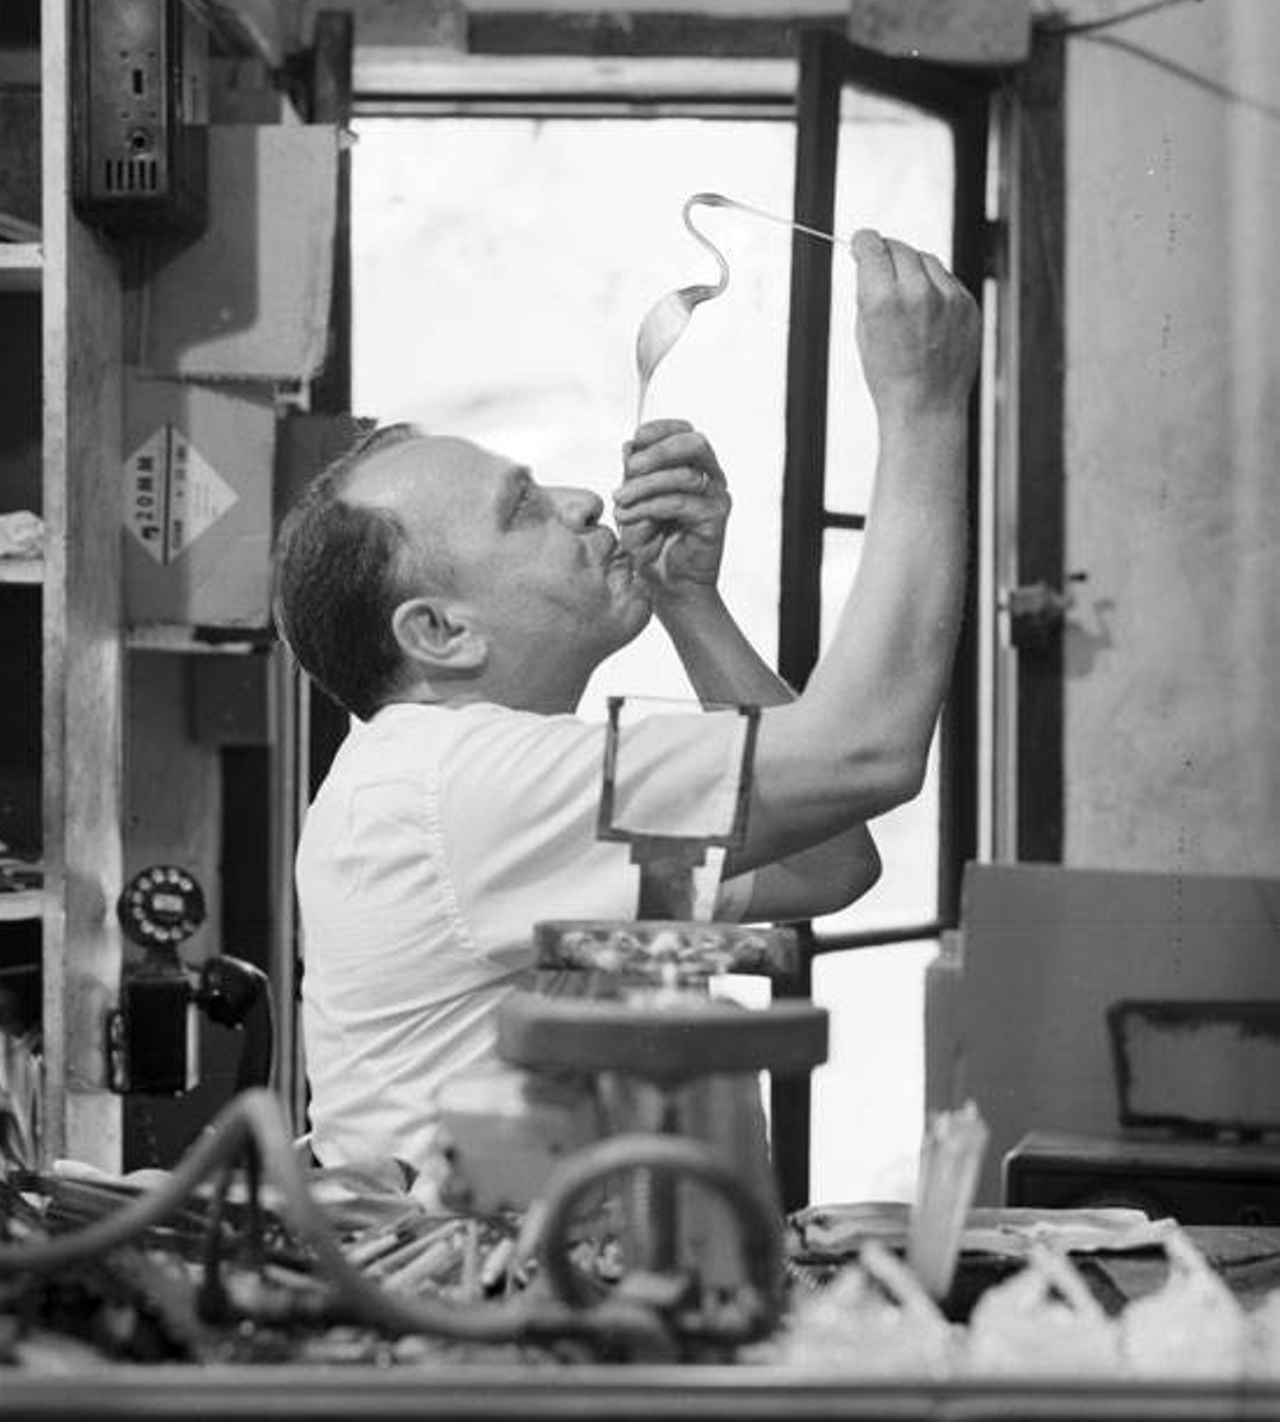 Lawrence "Larry" Williams can be seen blowing glass, which was his business. He operated the shop for 60 years out of La Villita, though he took just a brief break during World War II to serve as a radio operator in the military.